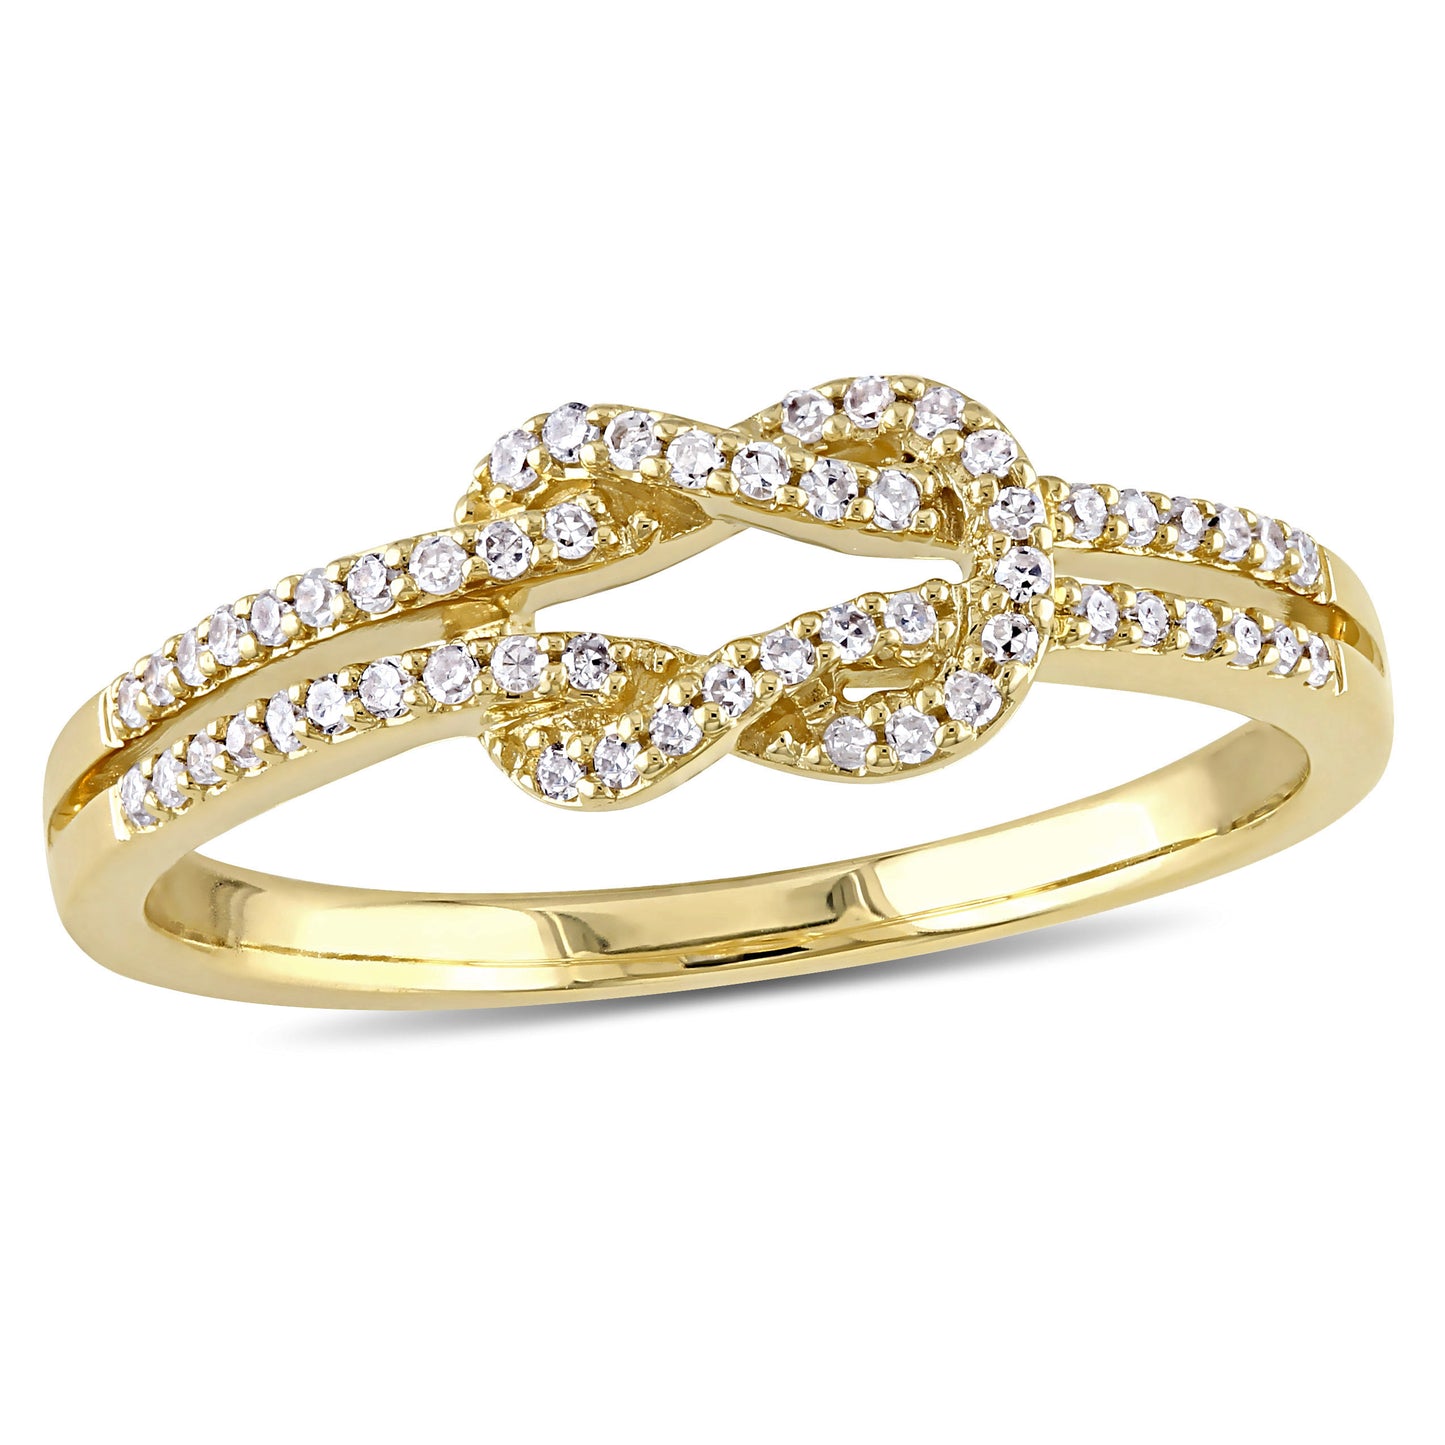 Double Infinity Diamond Ring in 14k Yellow Gold